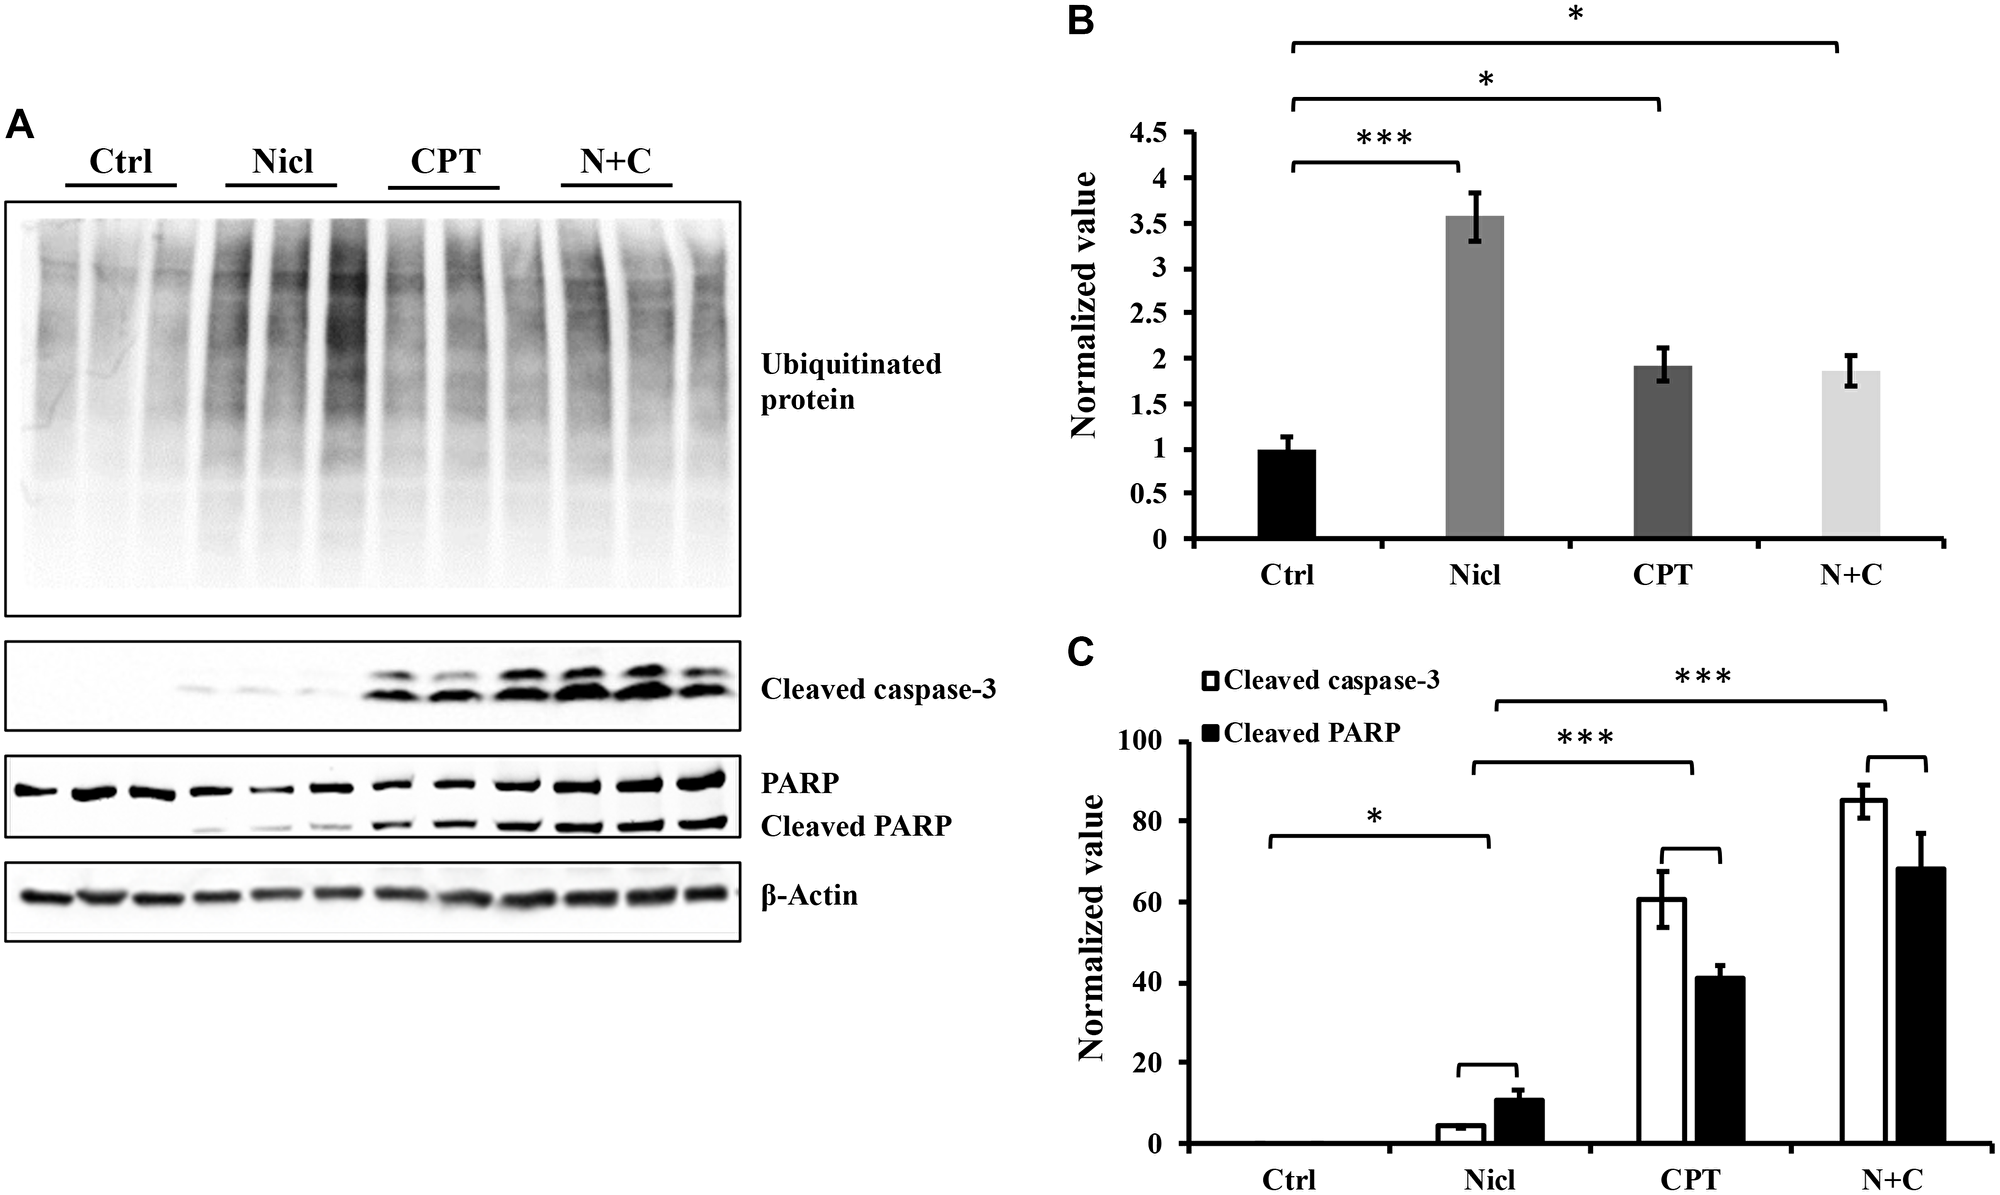 Niclosamide and CPT induce protein ubiquitination respectively and synergistically enhance caspase-3 and PARP cleavage.